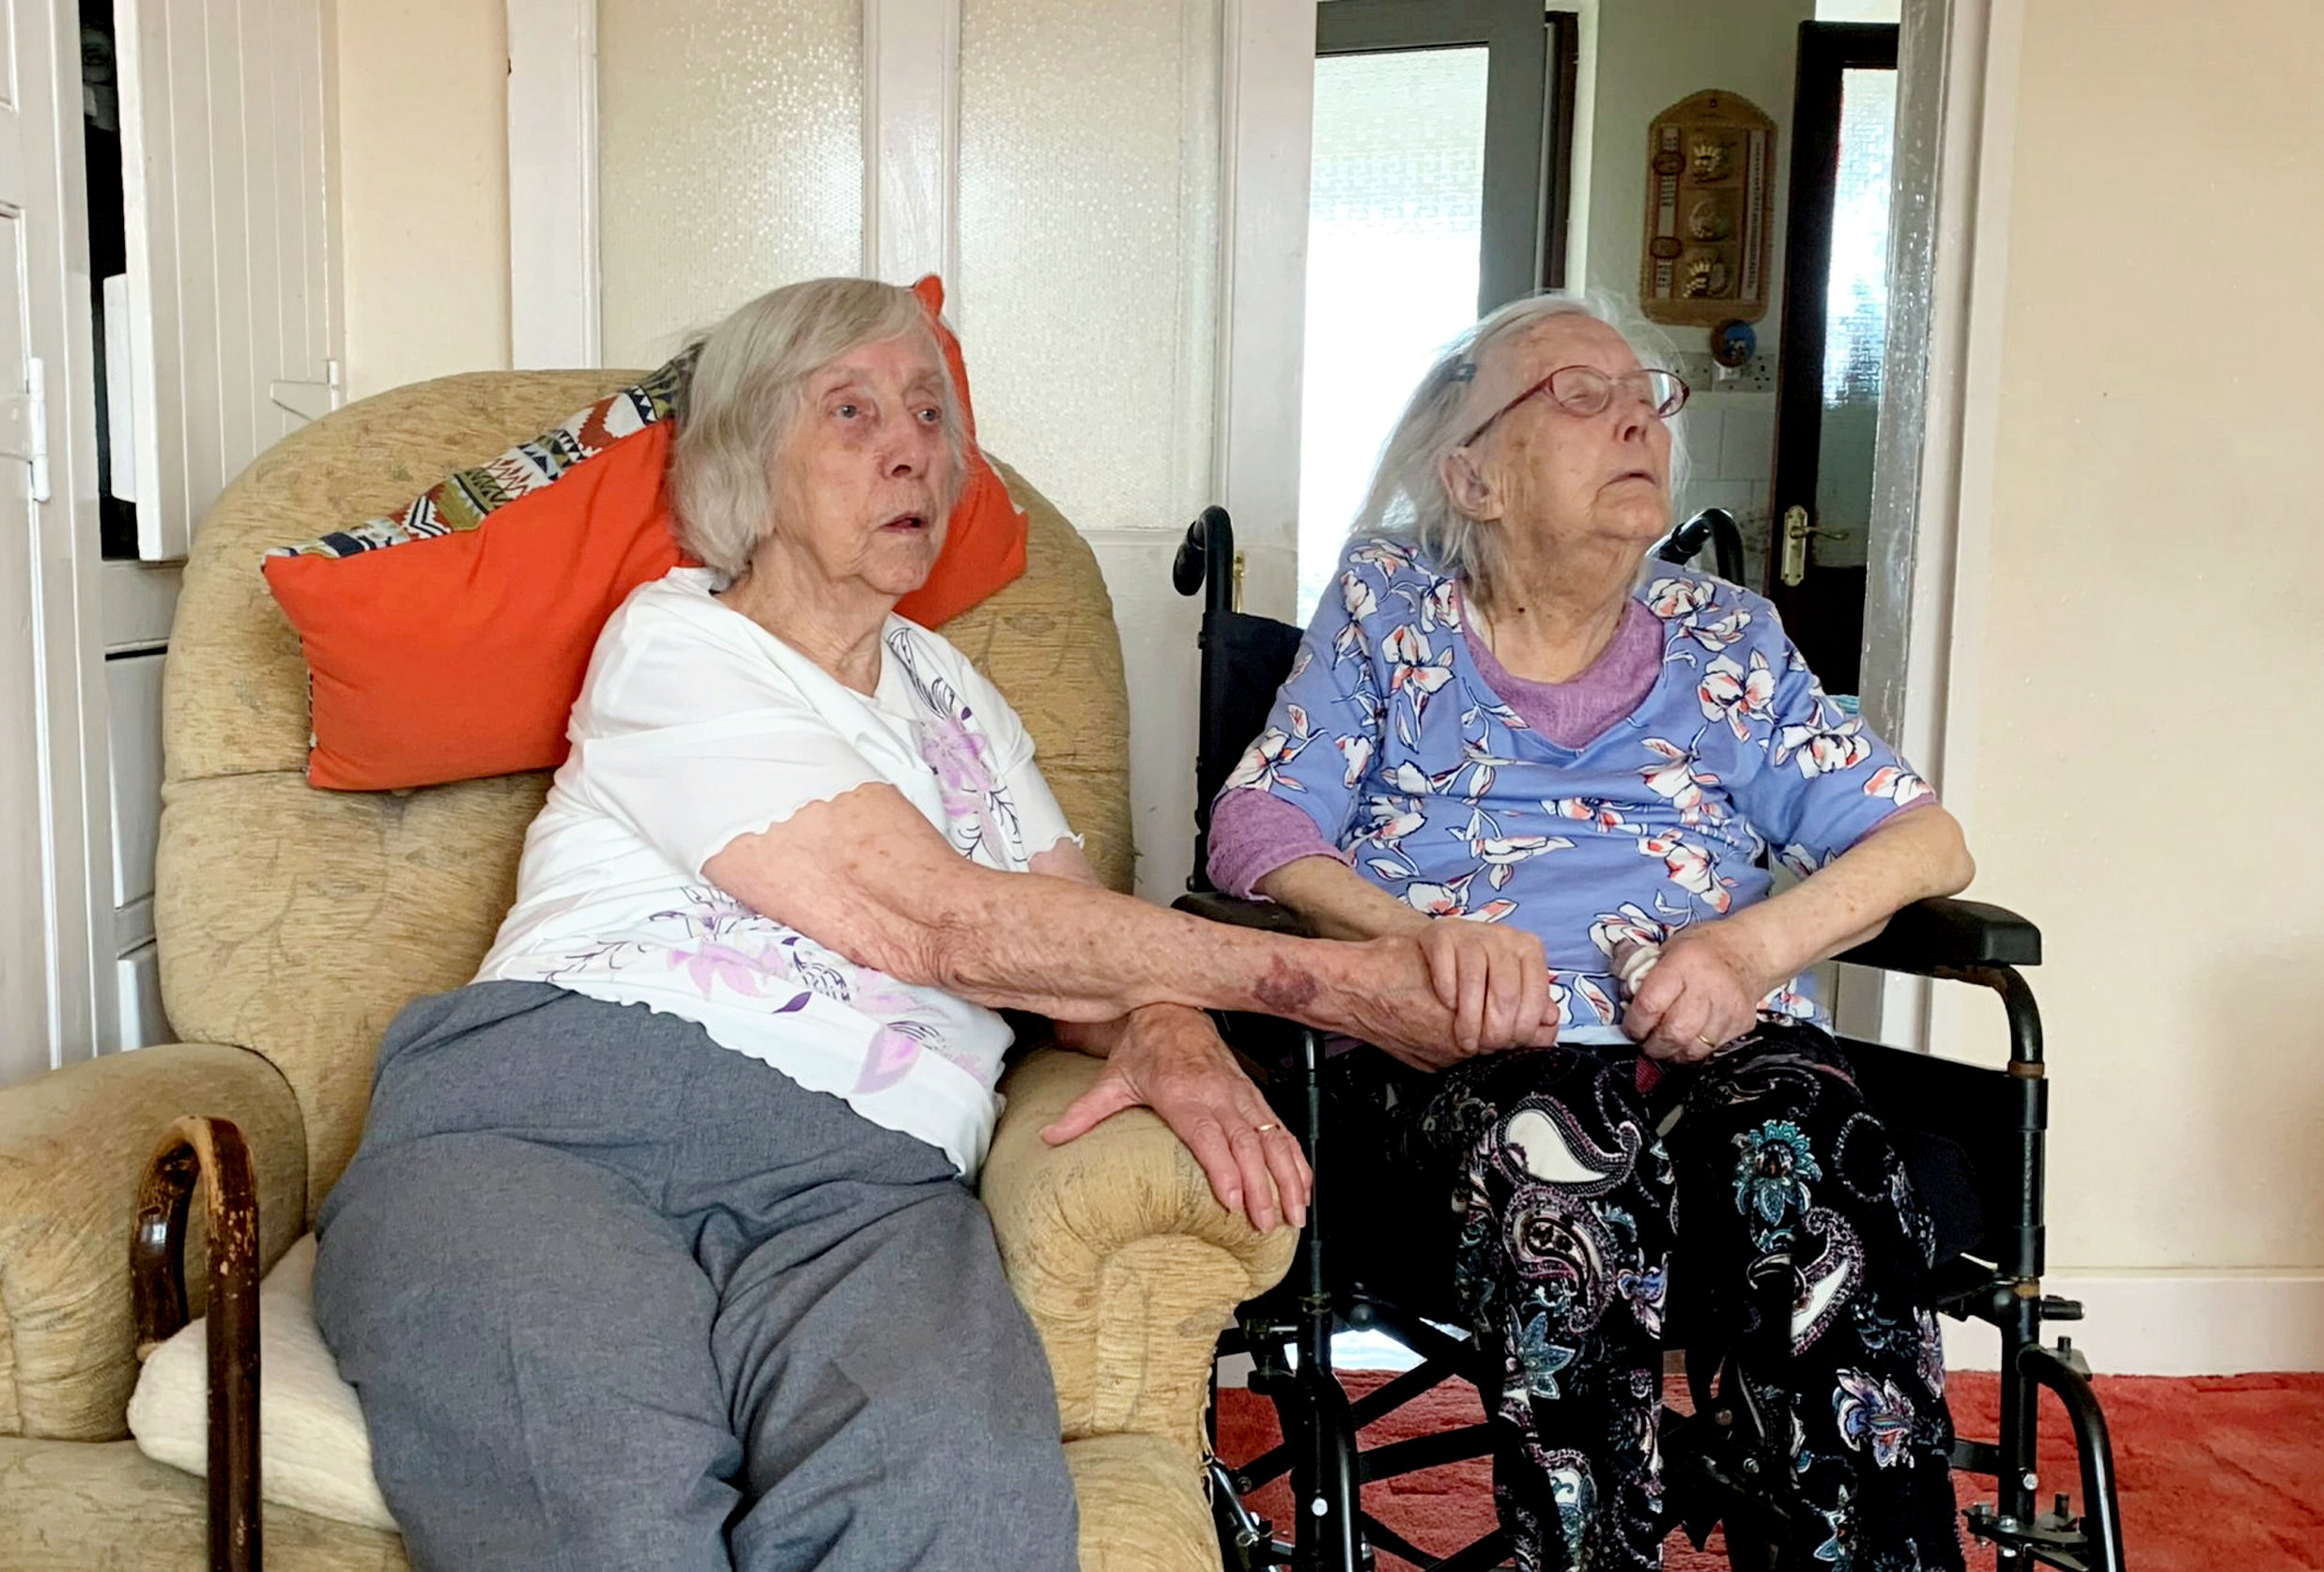 Britain's oldest twins who pride themselves on leading “frugal lives” have celebrated their 102nd birthdays – with cheese sandwiches. (Steve Chatterley, SWNS/Zenger)